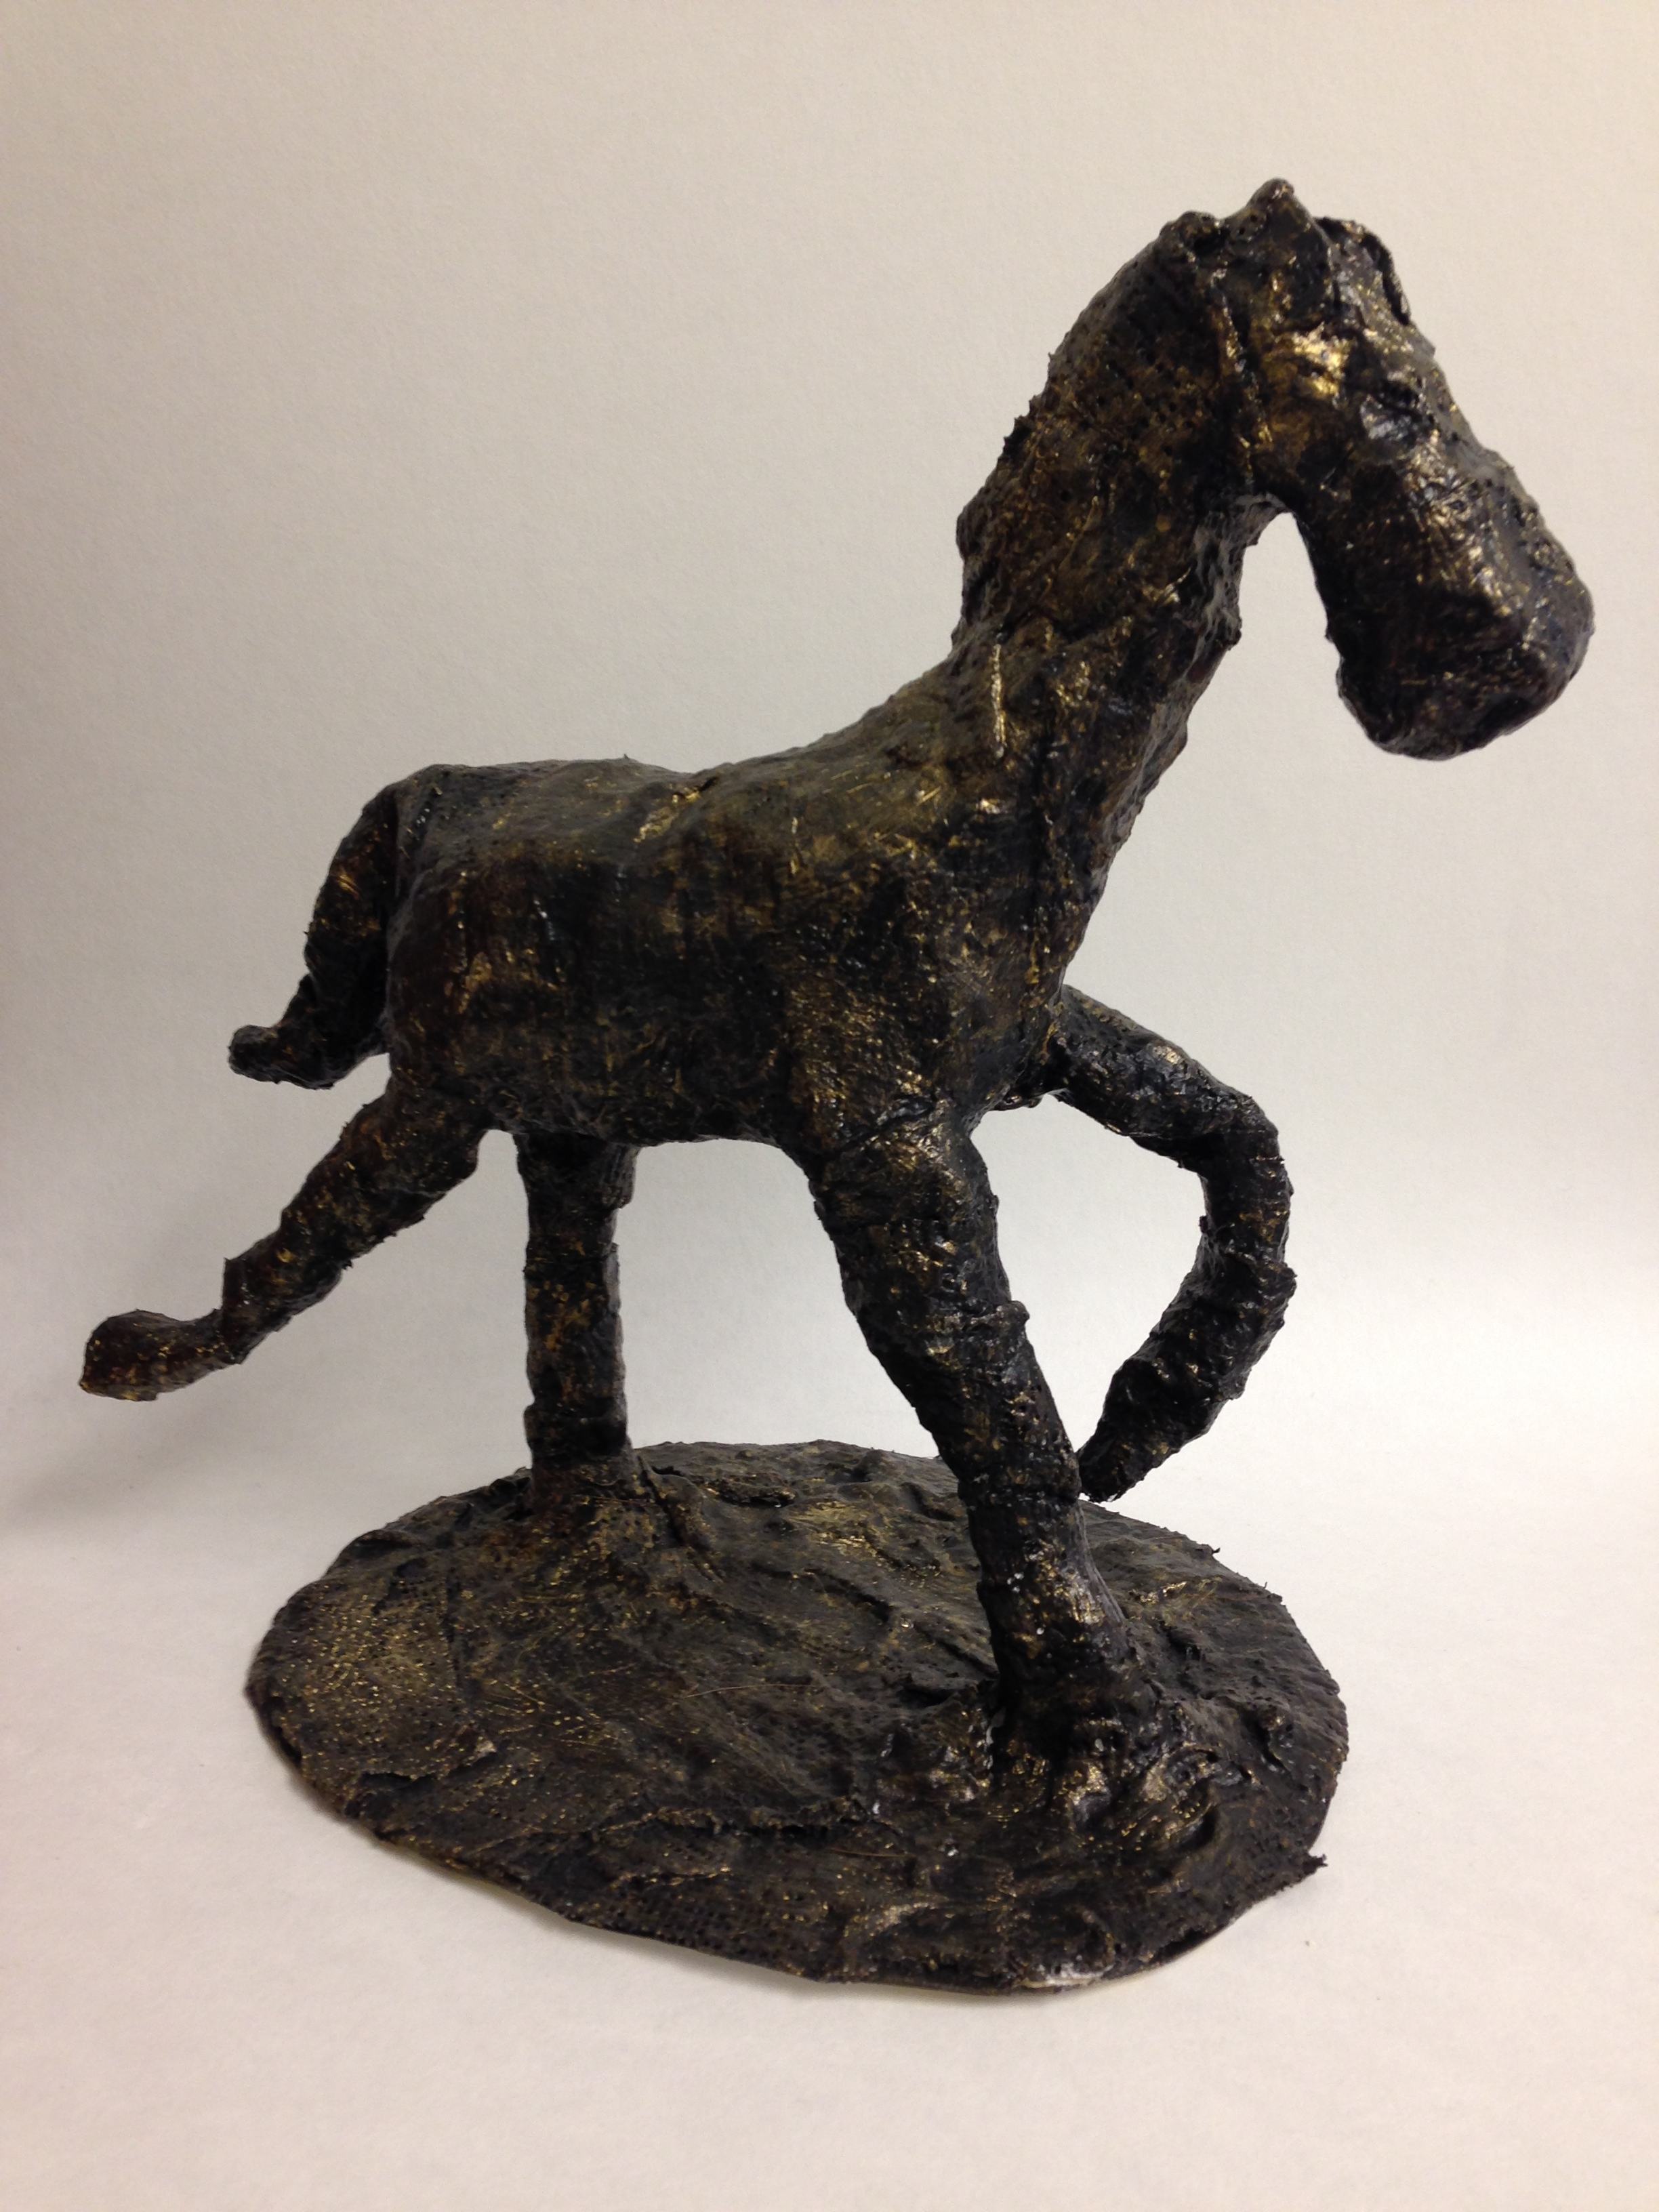 Sculpture of a horse in mid-trot